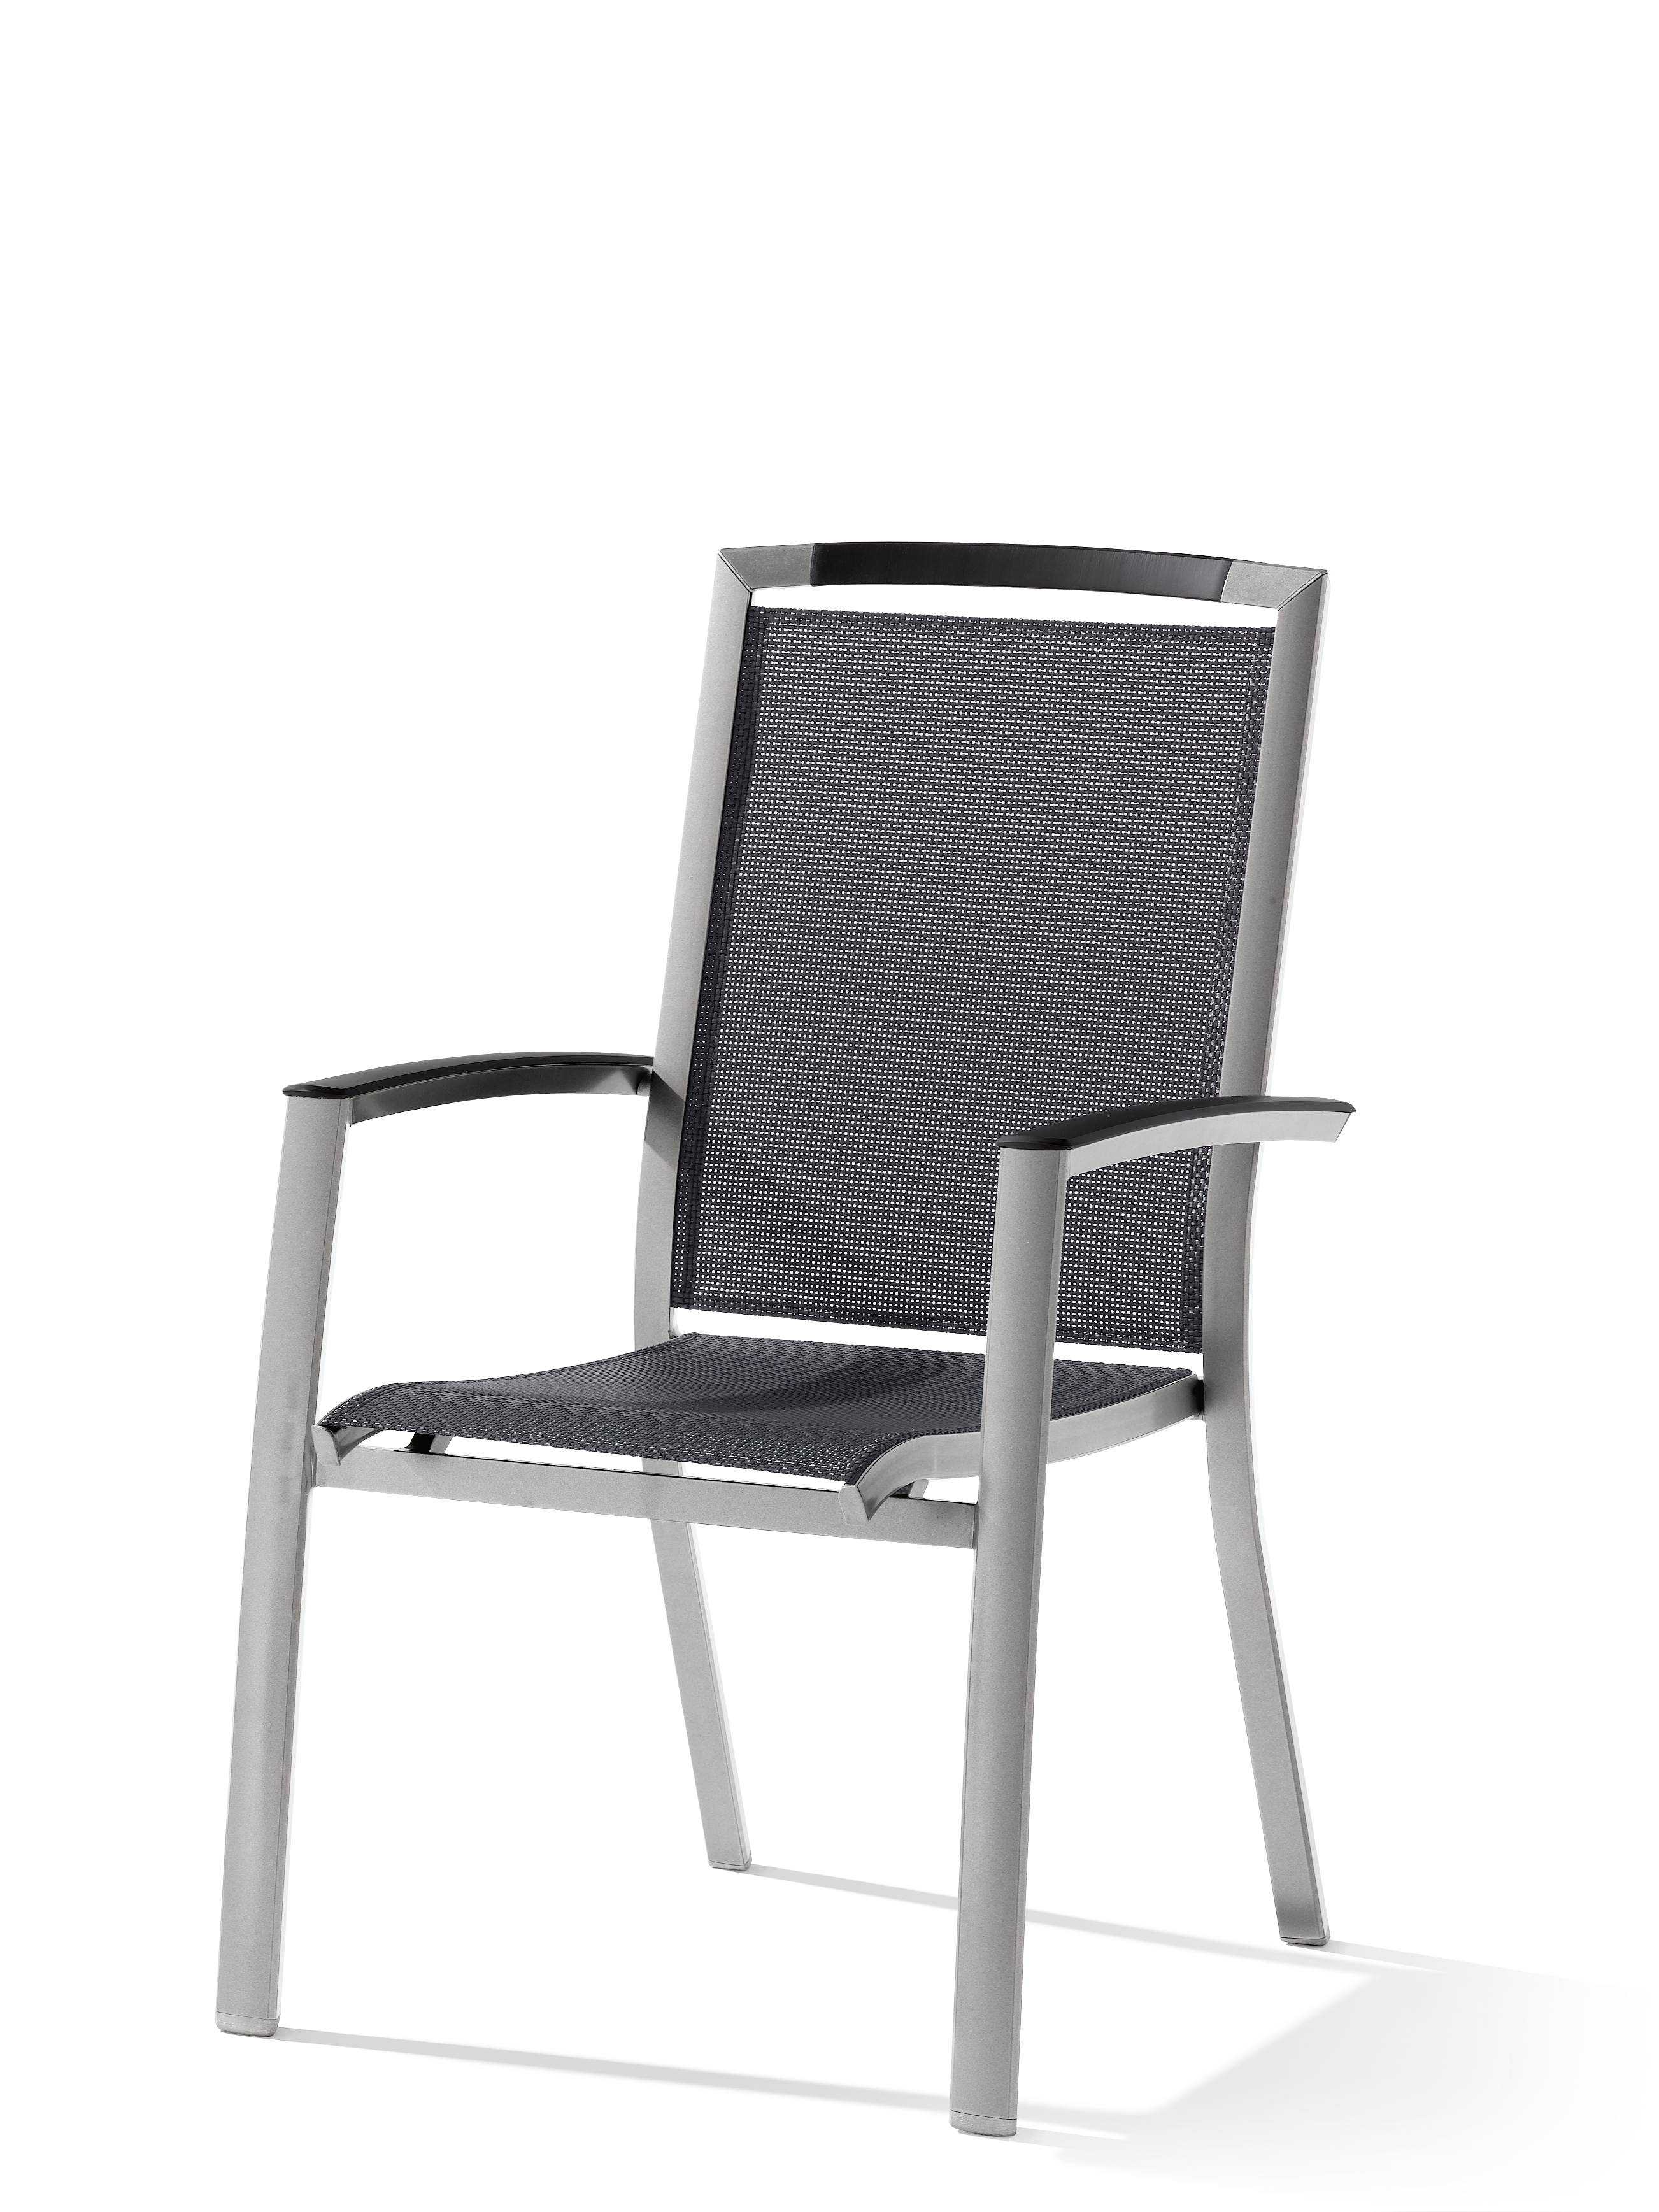 Stacking armchair | Sieger GmbH